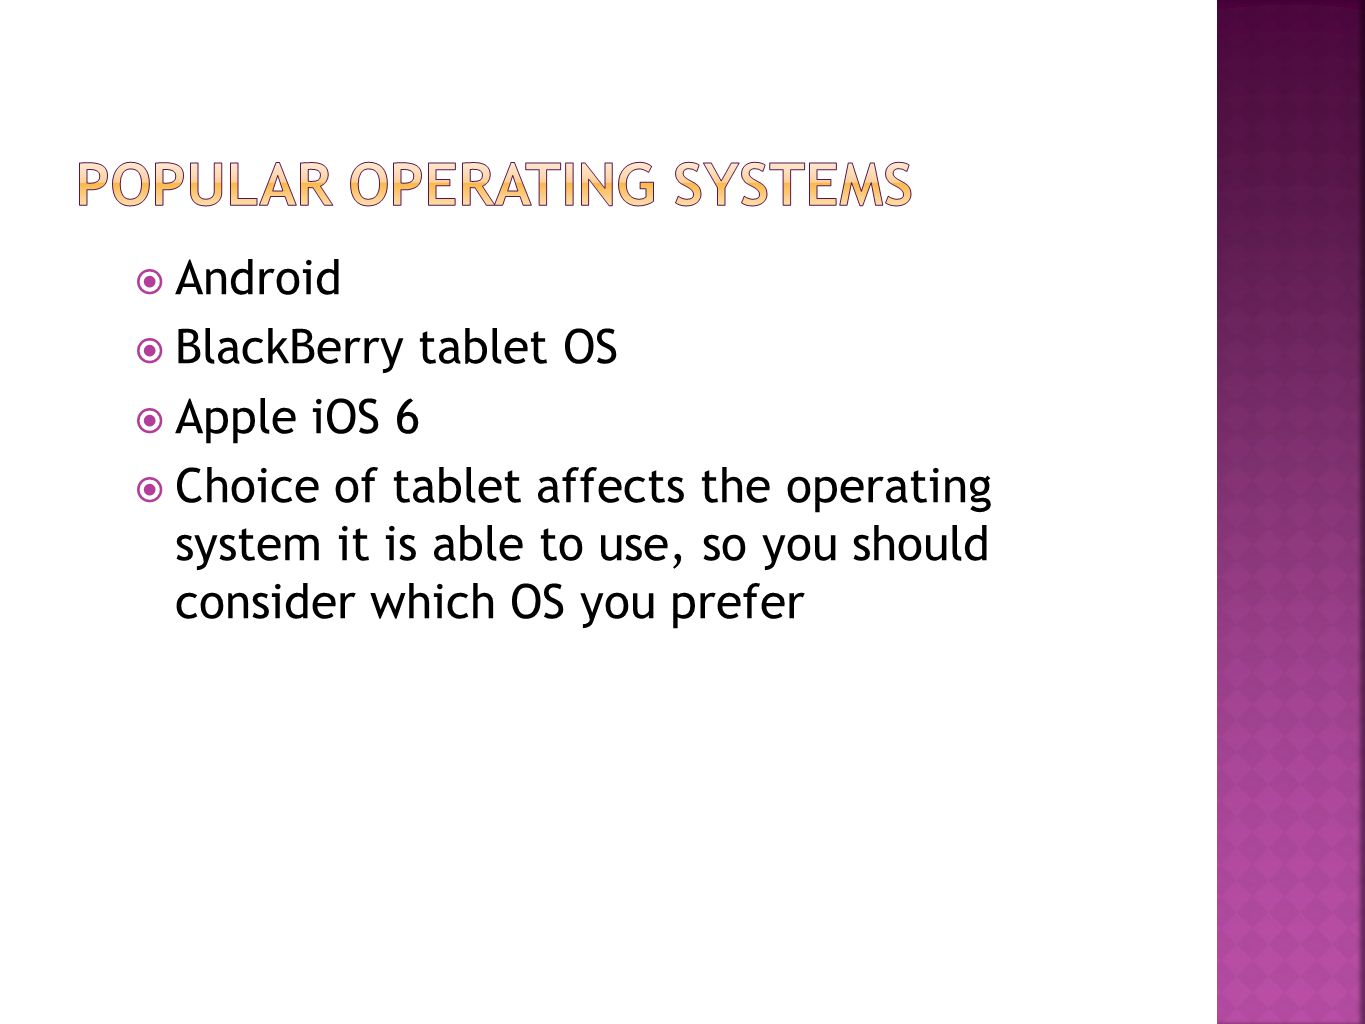  Android  BlackBerry tablet OS  Apple iOS 6  Choice of tablet affects the operating system it is able to use, so you should consider which OS you prefer